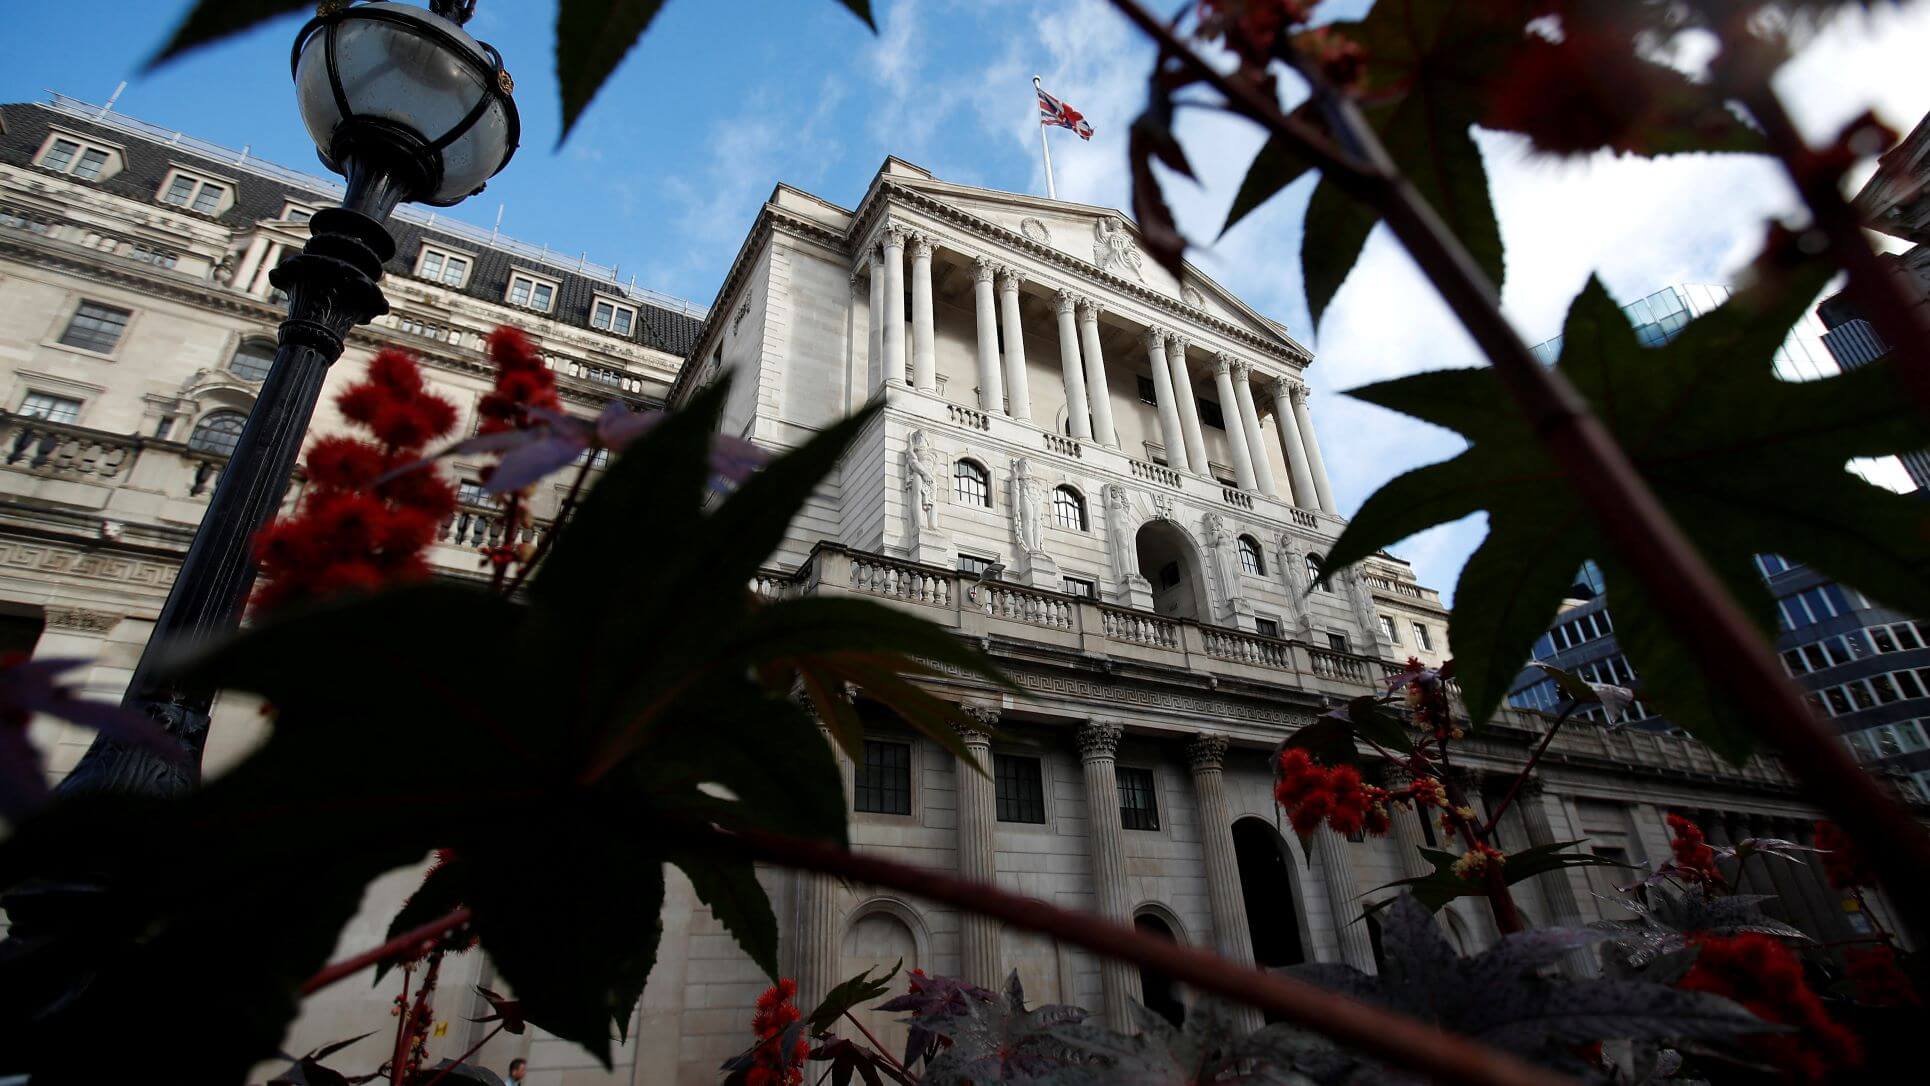 Bank Of England To Hike By 75 bps On 3 Nov But May Go Bigger - Reuters Poll